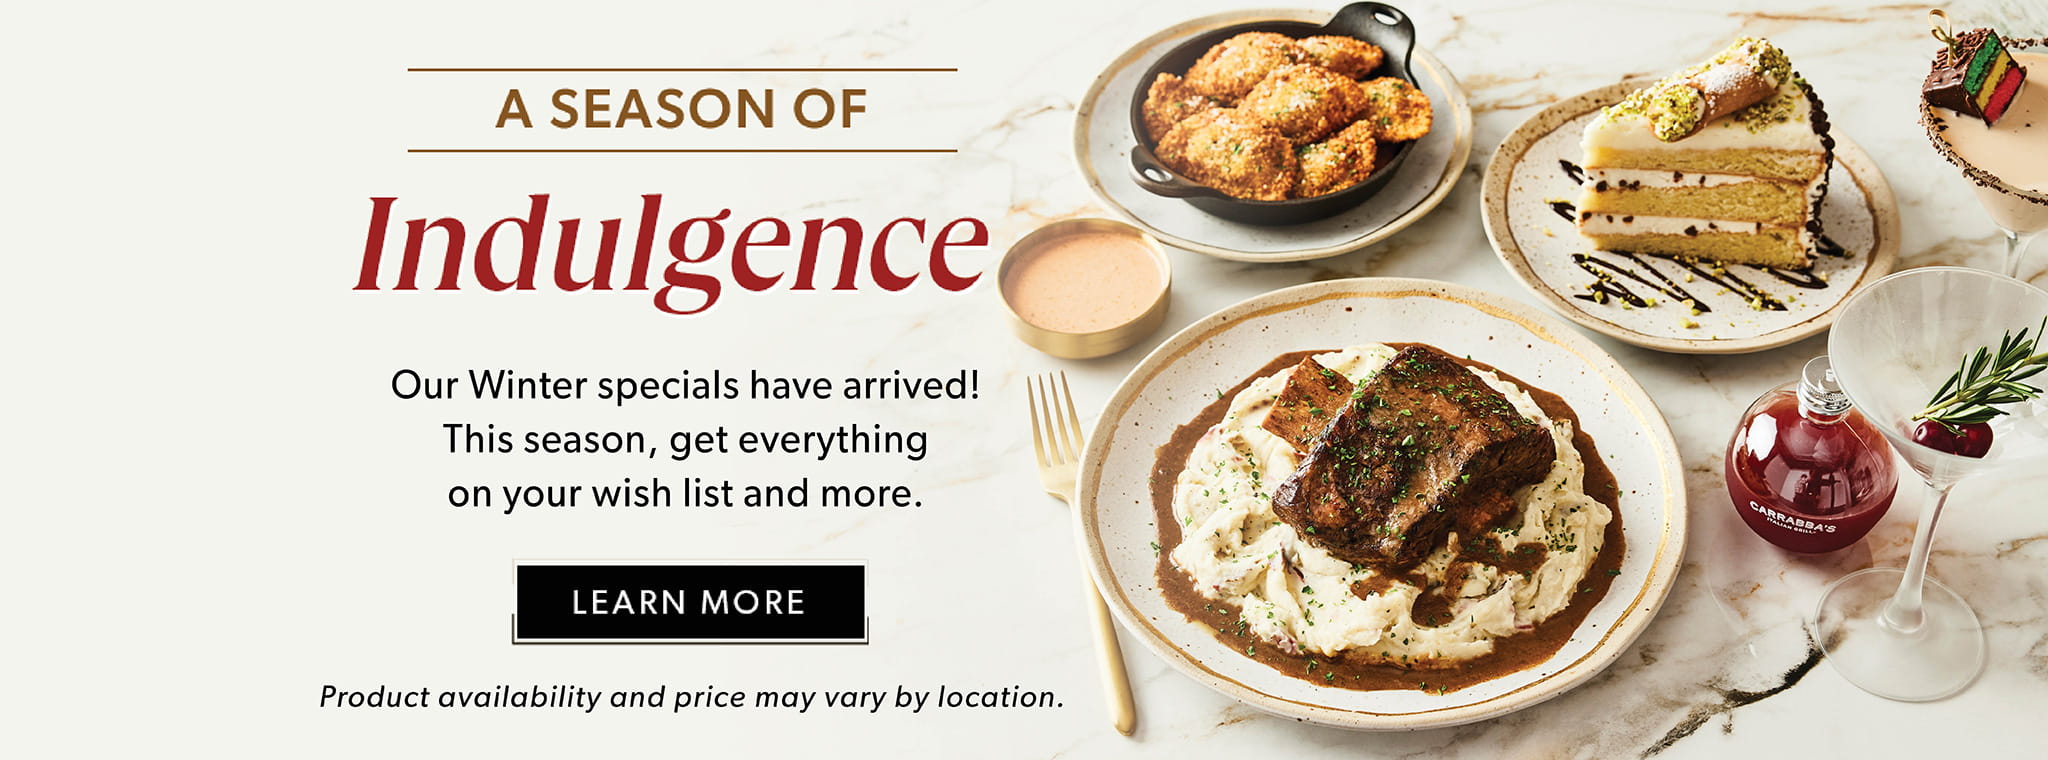 A Season Of Indulgence - Our Winter specials have arrived! This season, get everything on your wish list and more. Learn More